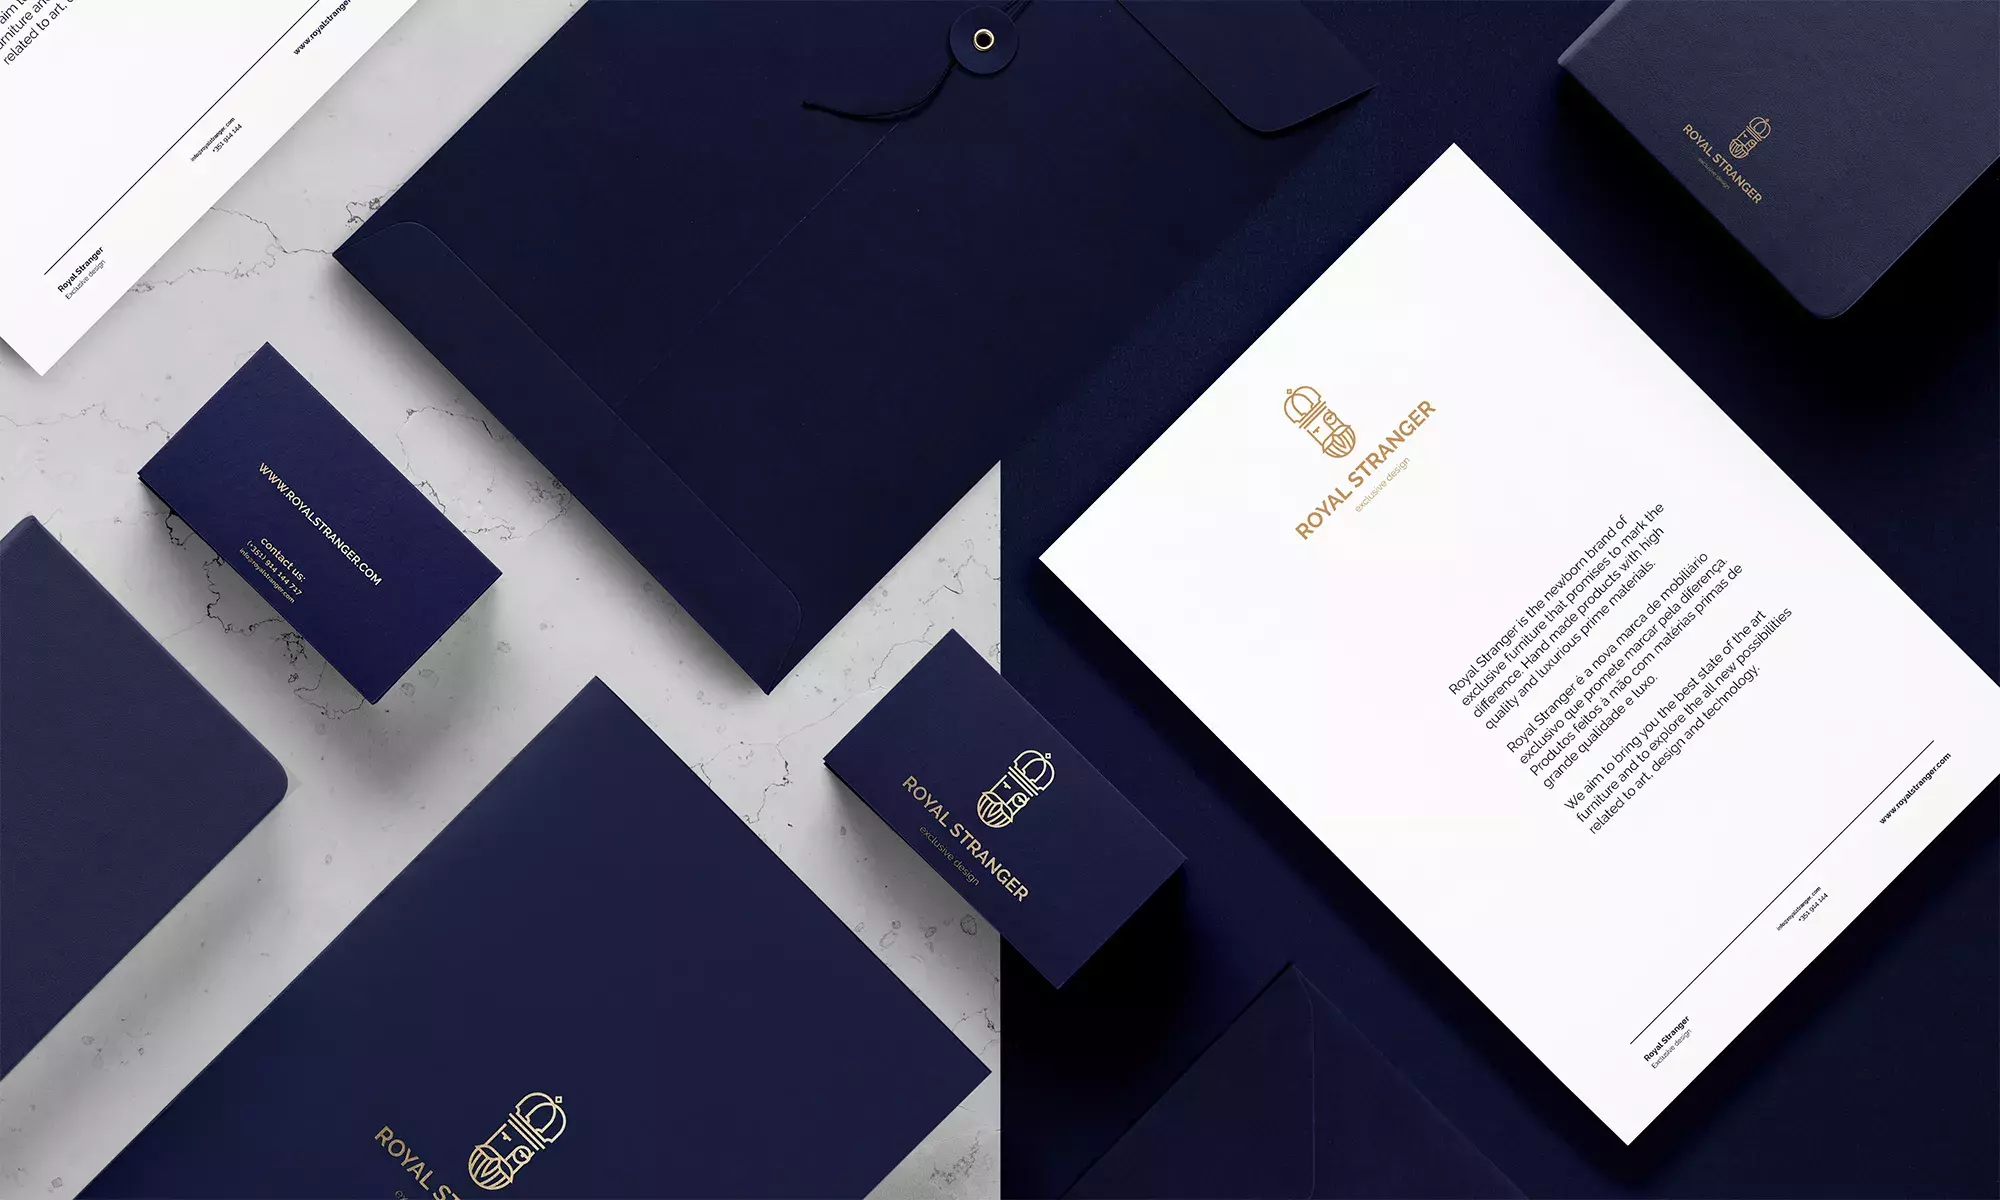 Branding and Visual Identity for Pure Luxe Magazine